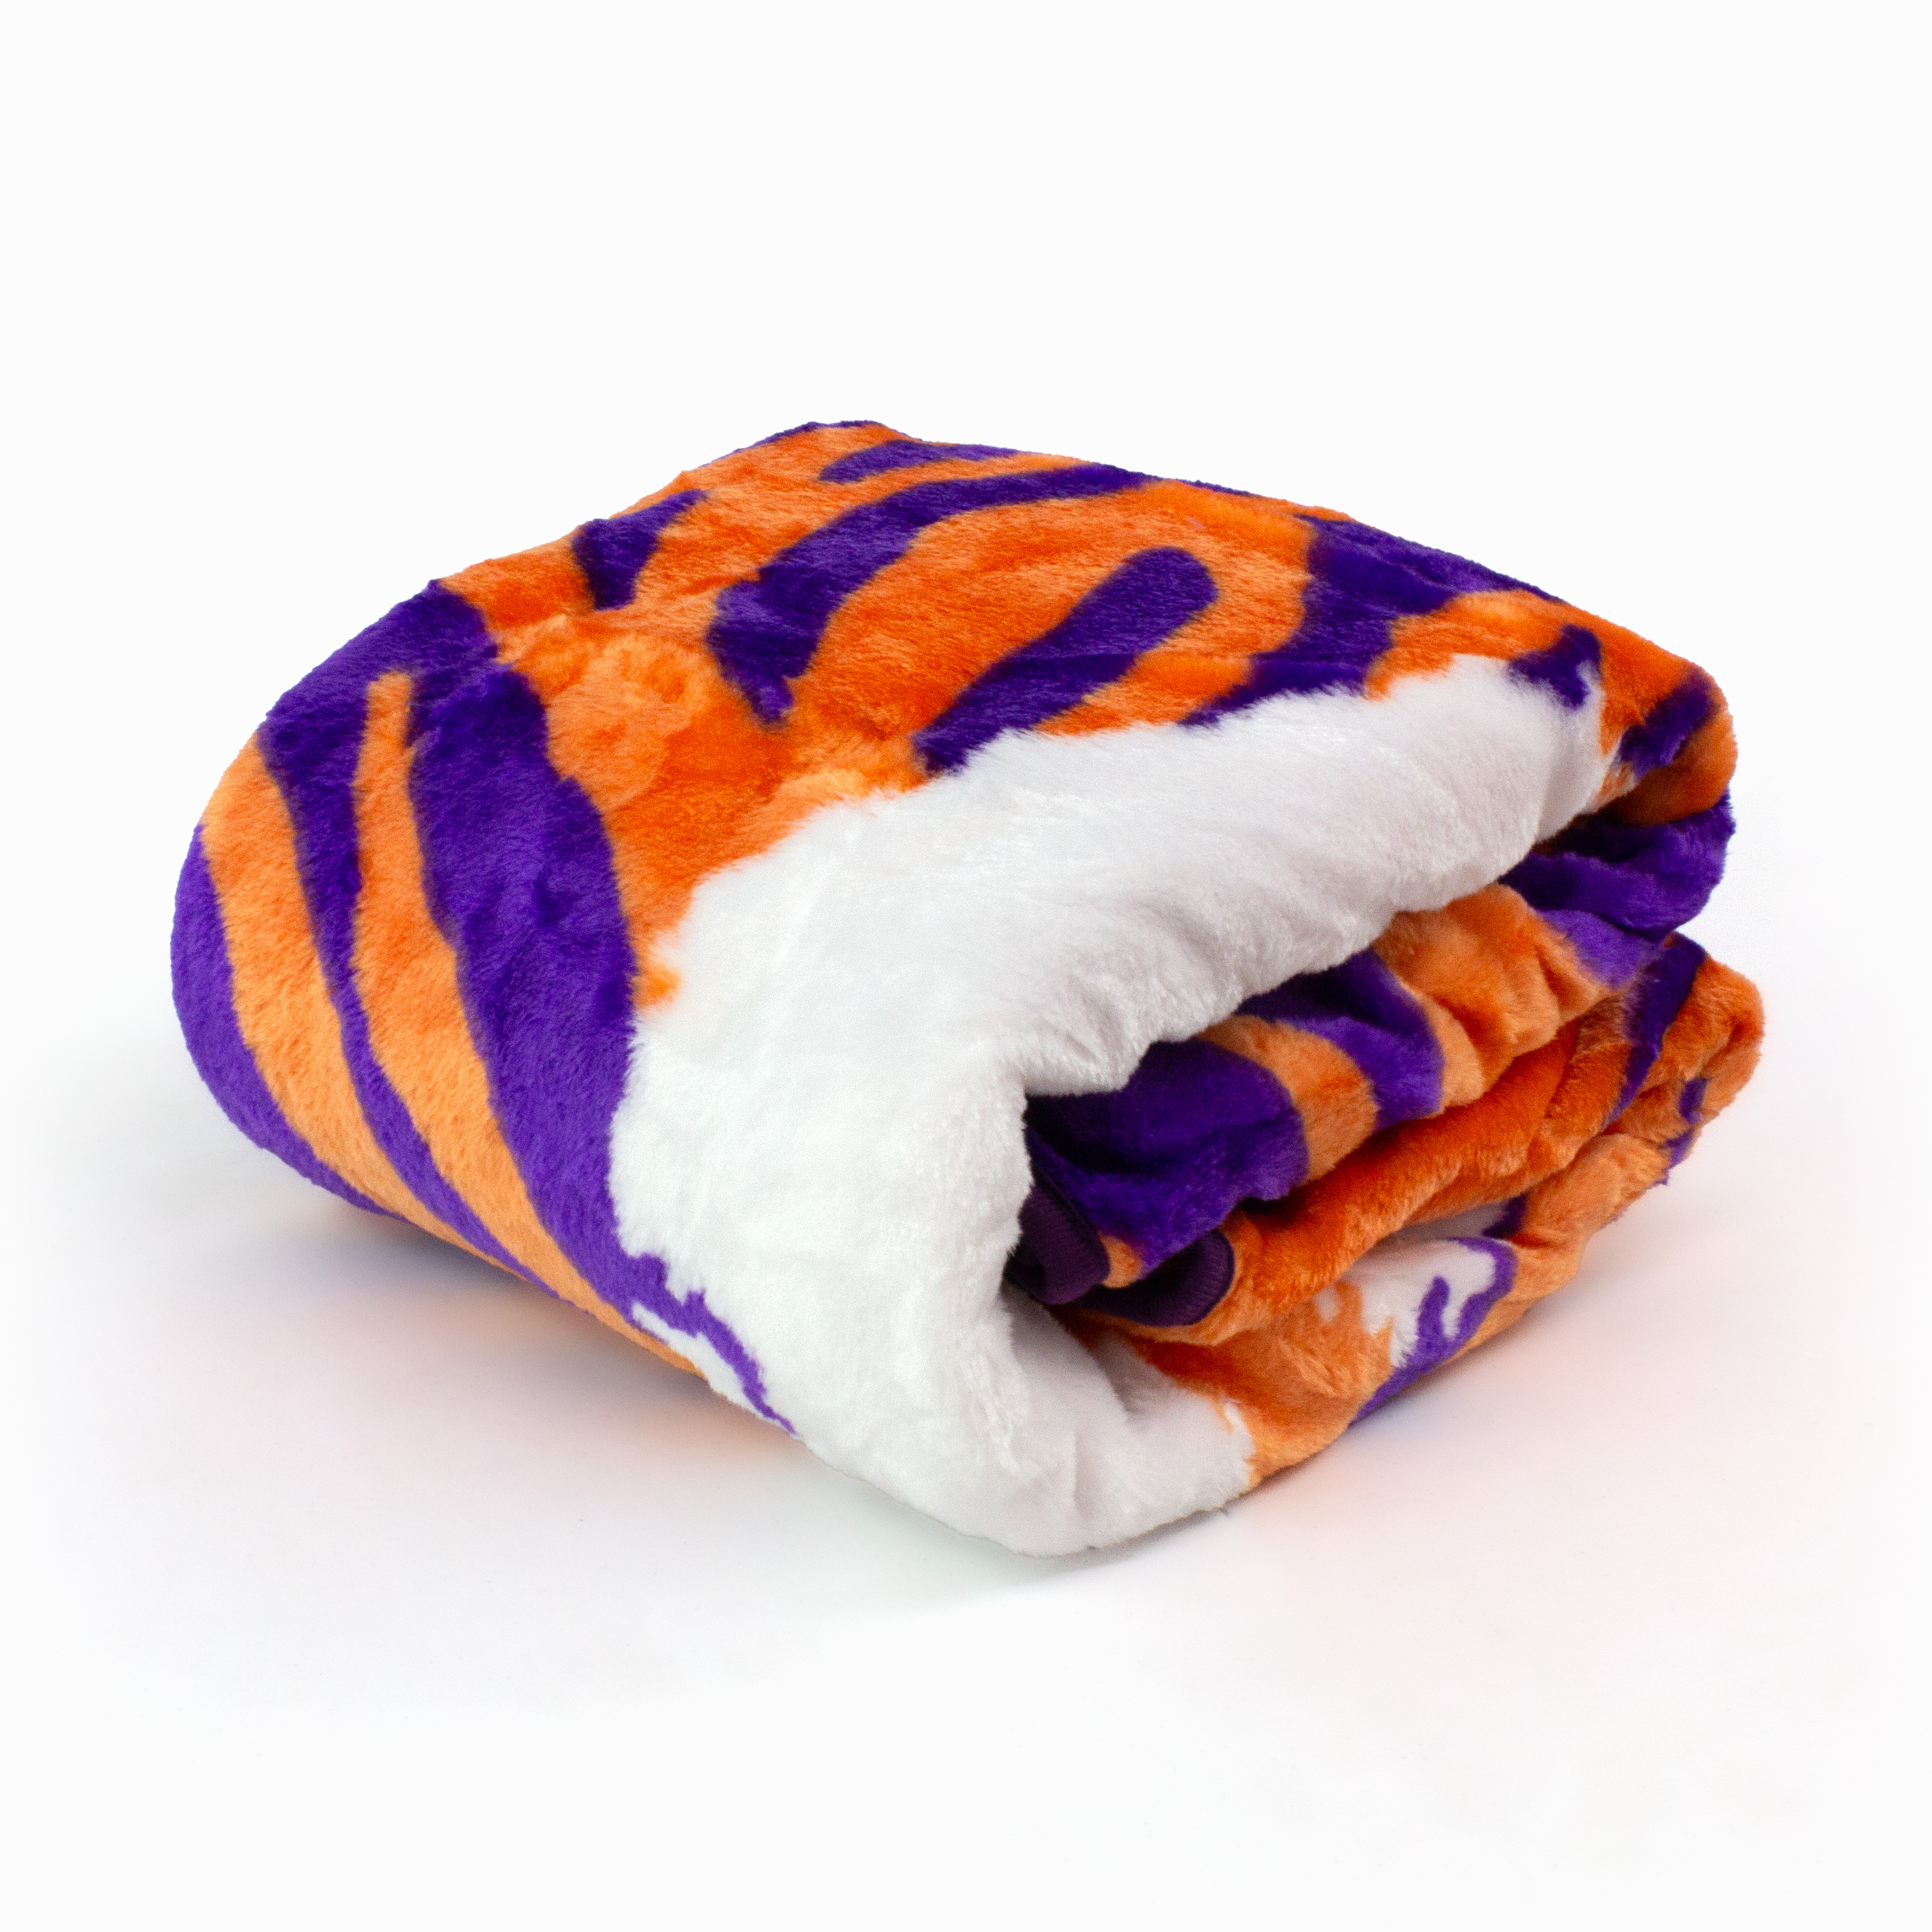 College Covers Everything Comfy Clemson Tigers Soft Raschel Throw Blanket, 60" x 50" - image 4 of 8